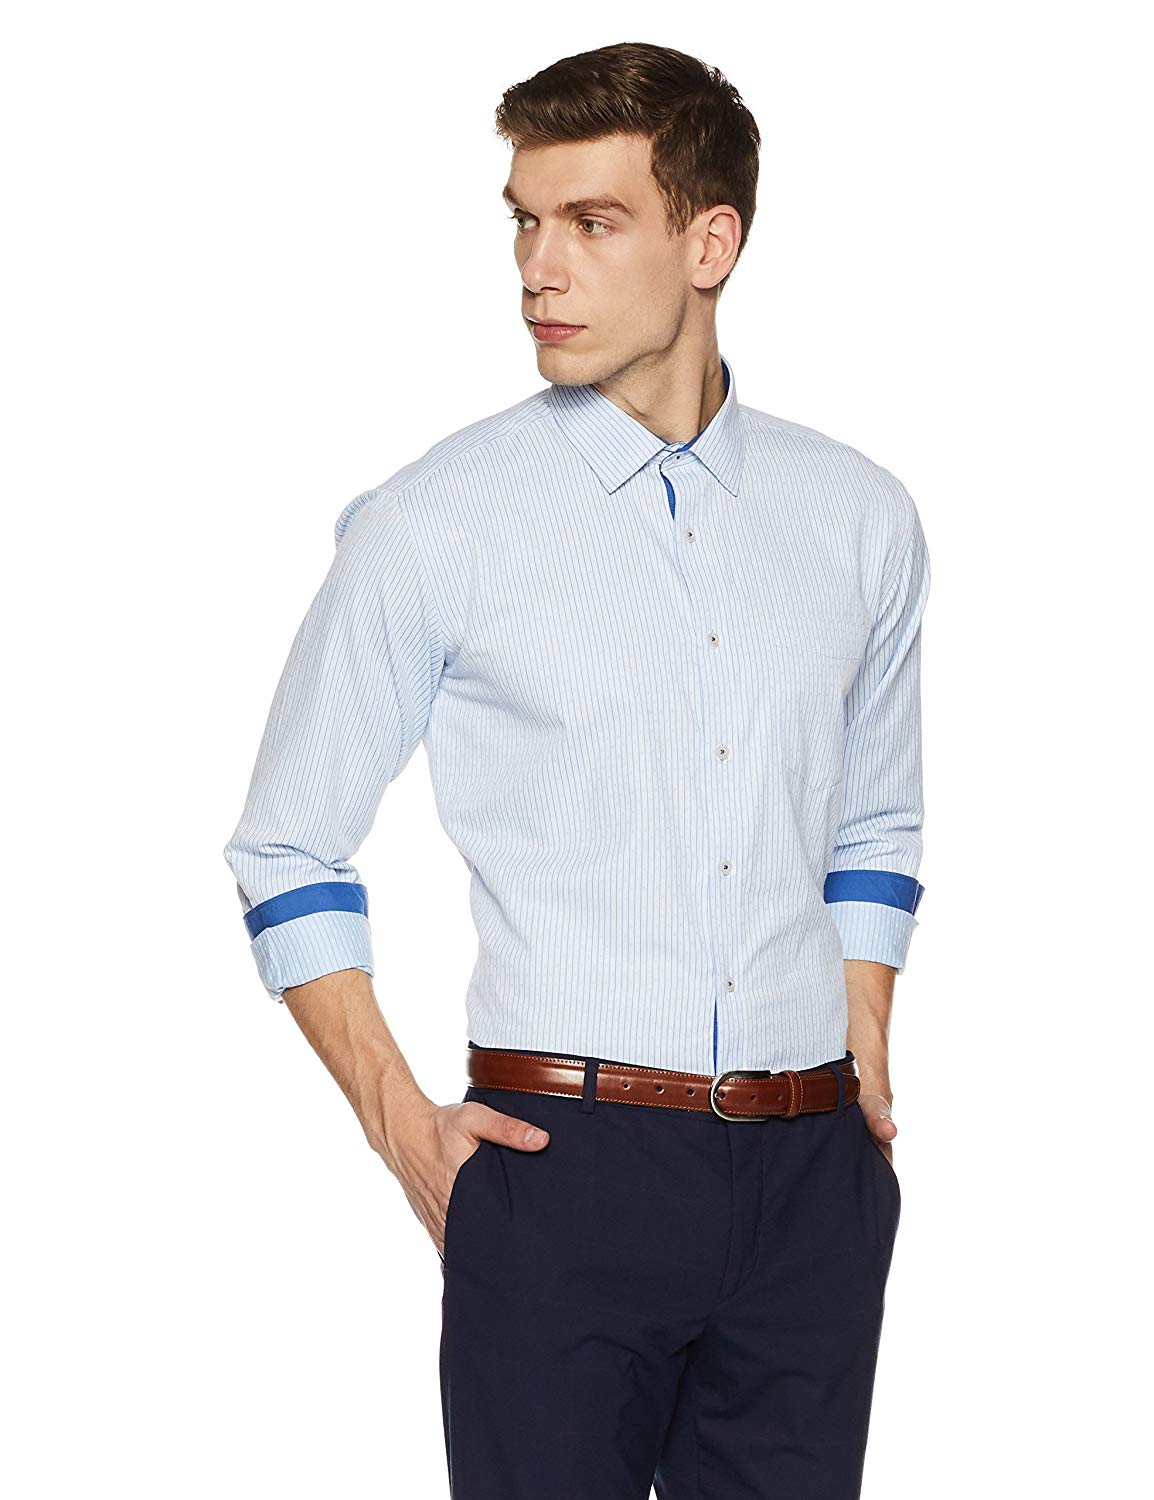 ( Huge Off) Amazon's Symbol Men's Shirts Just @ ₹223 Only